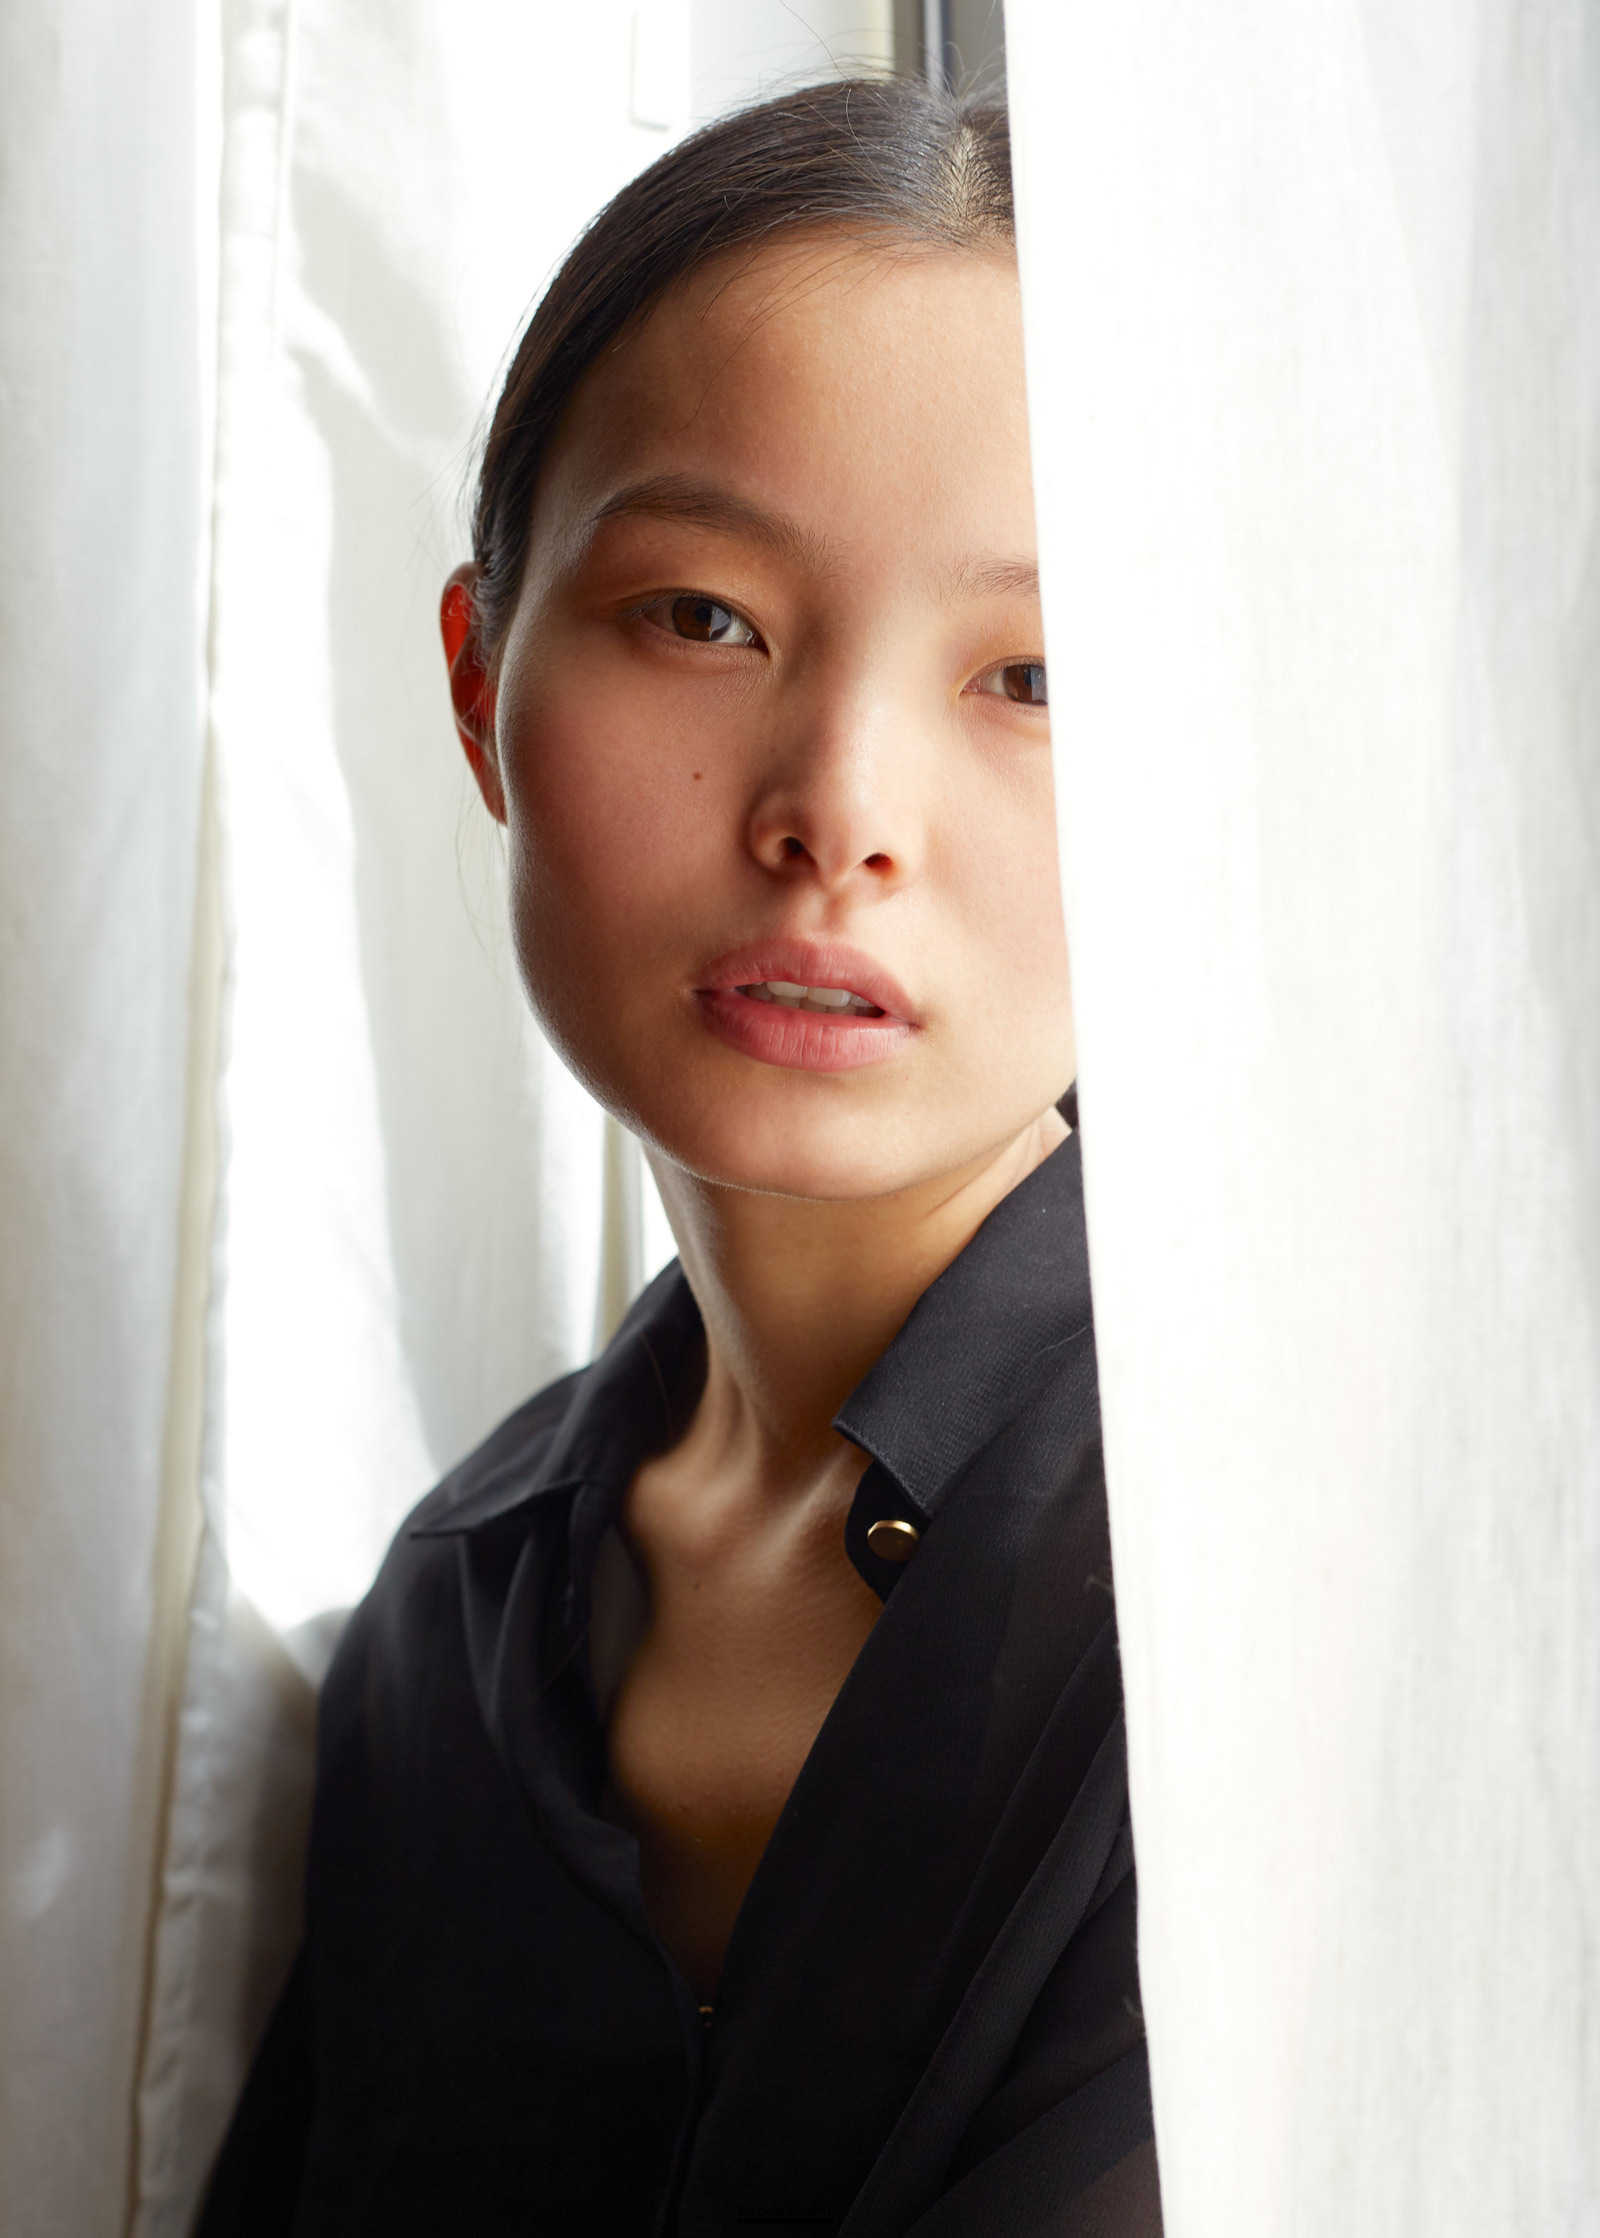 Go See: Ling Liu – the ones 2 watch.